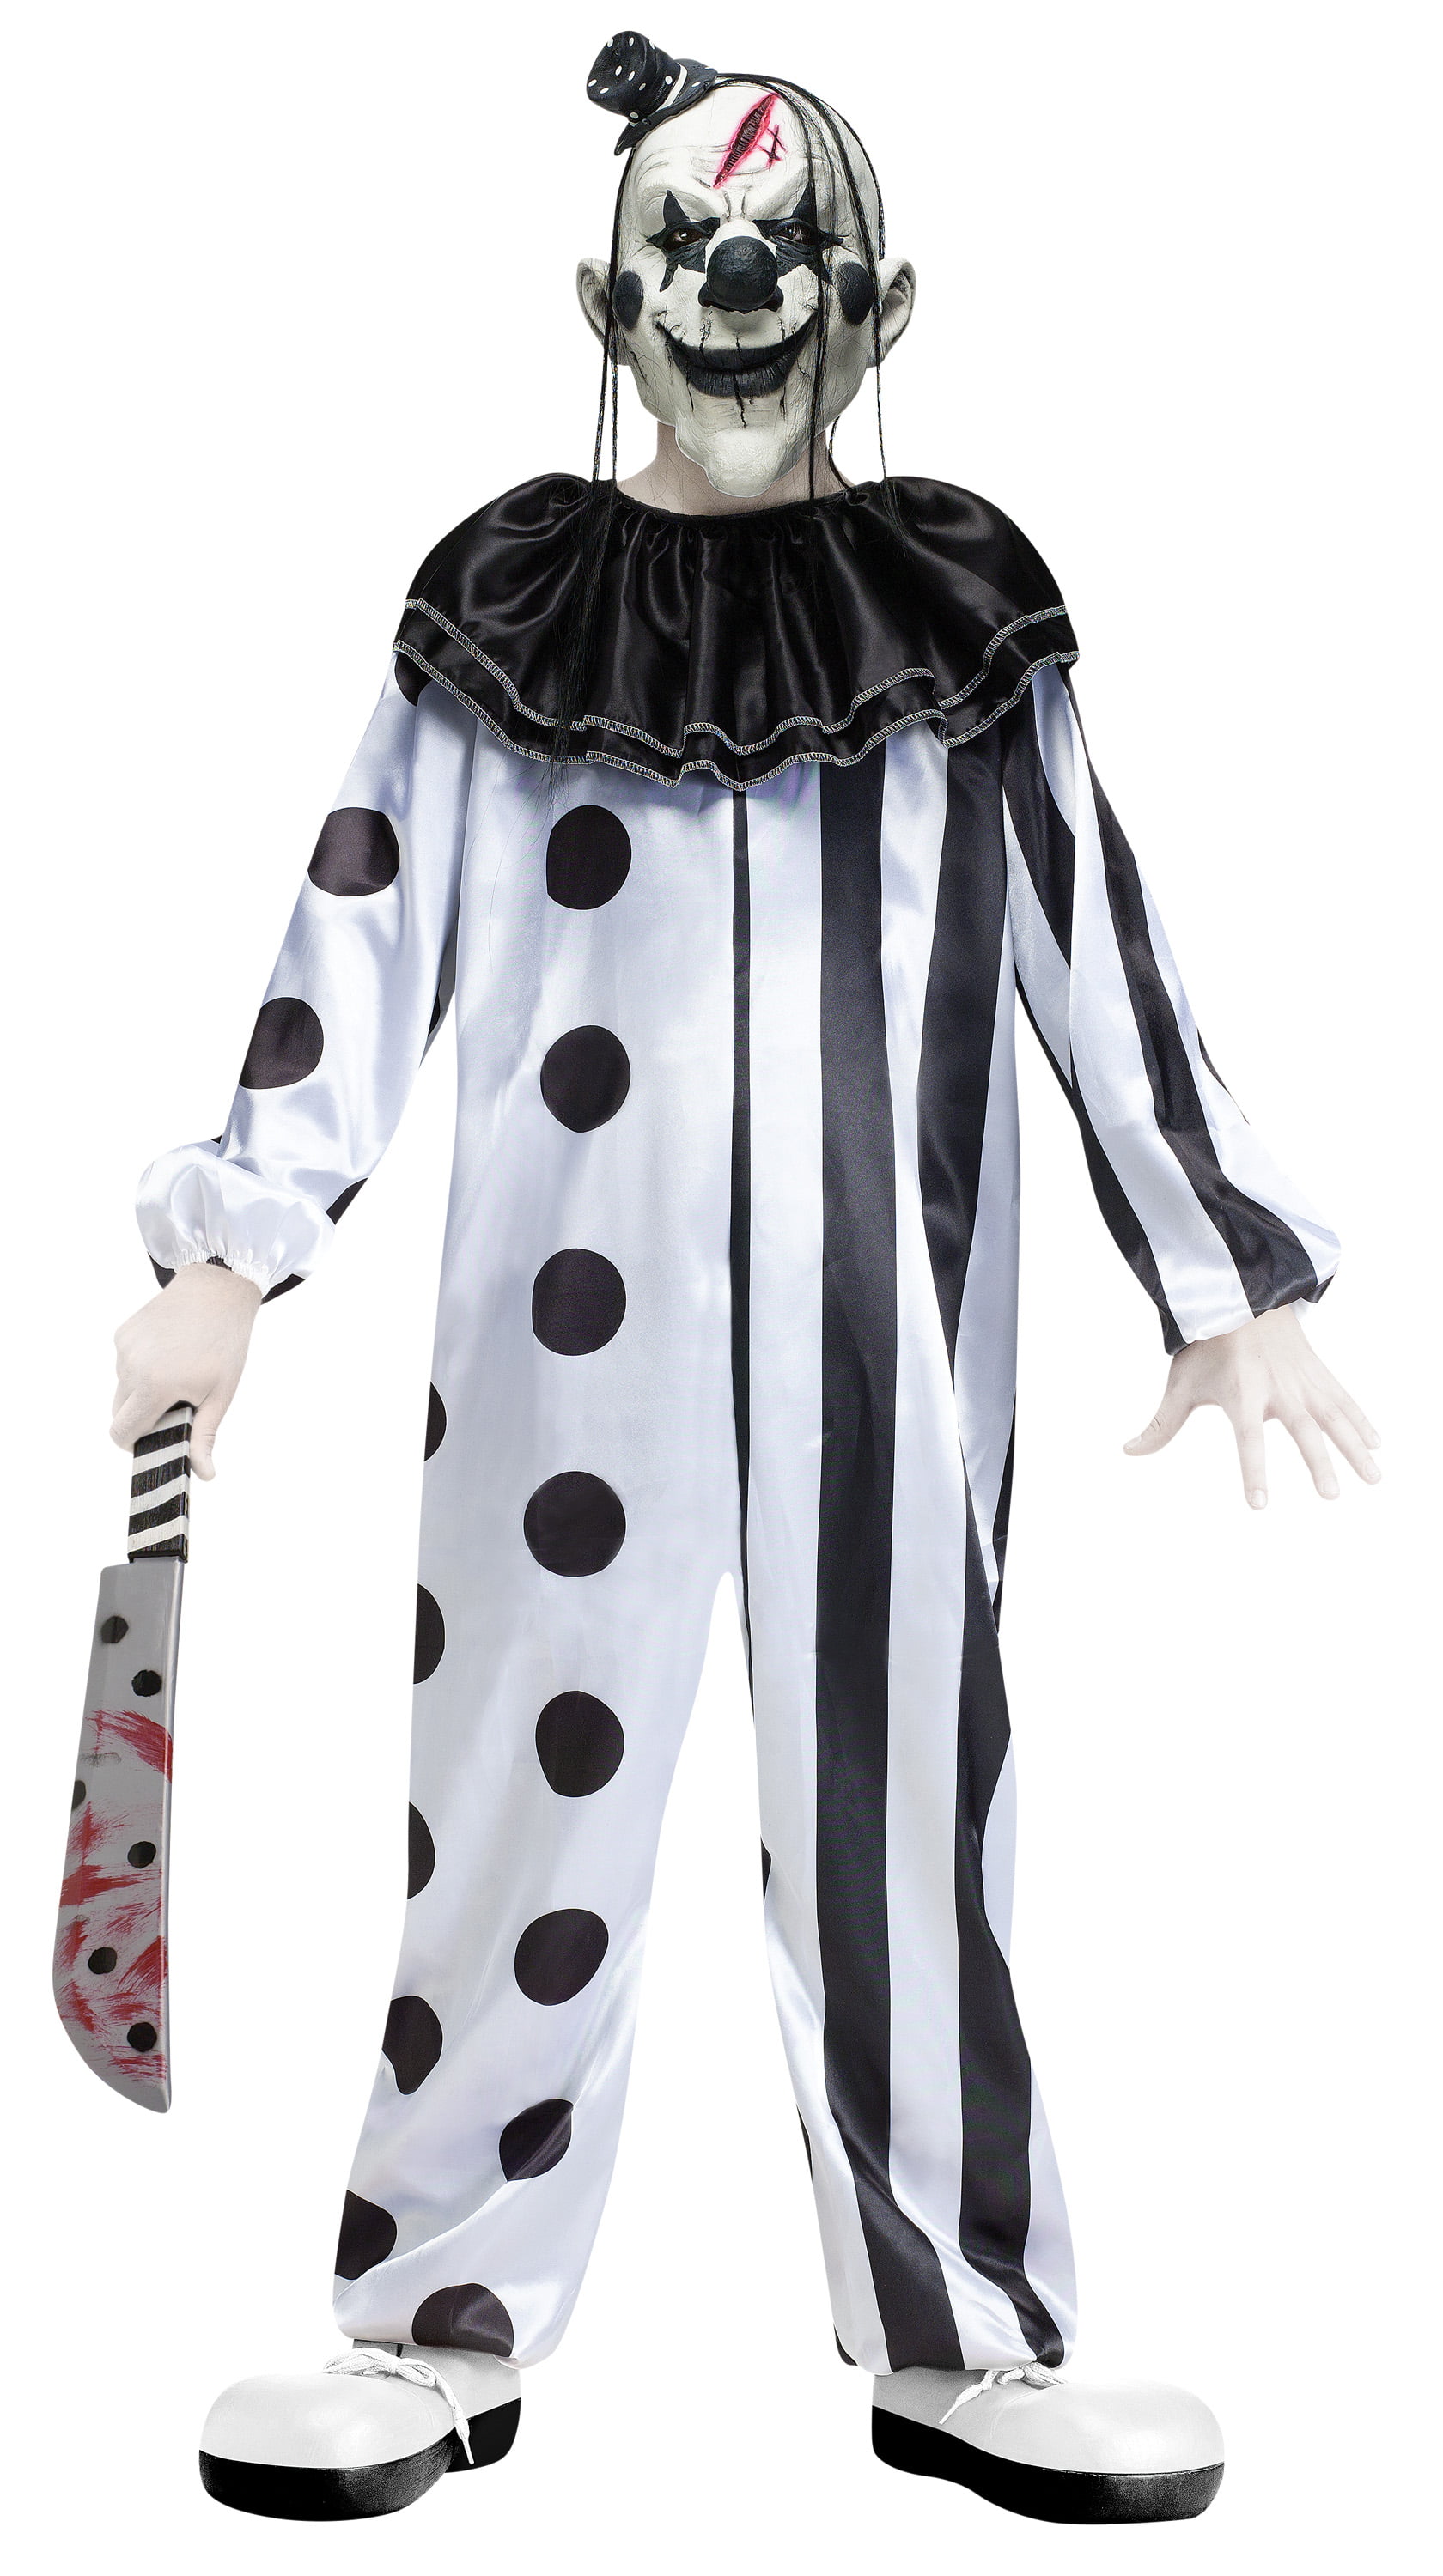 Cosplay Fancy Dress Halloween Party Killer Scary Adult Vintage Clown Costume 